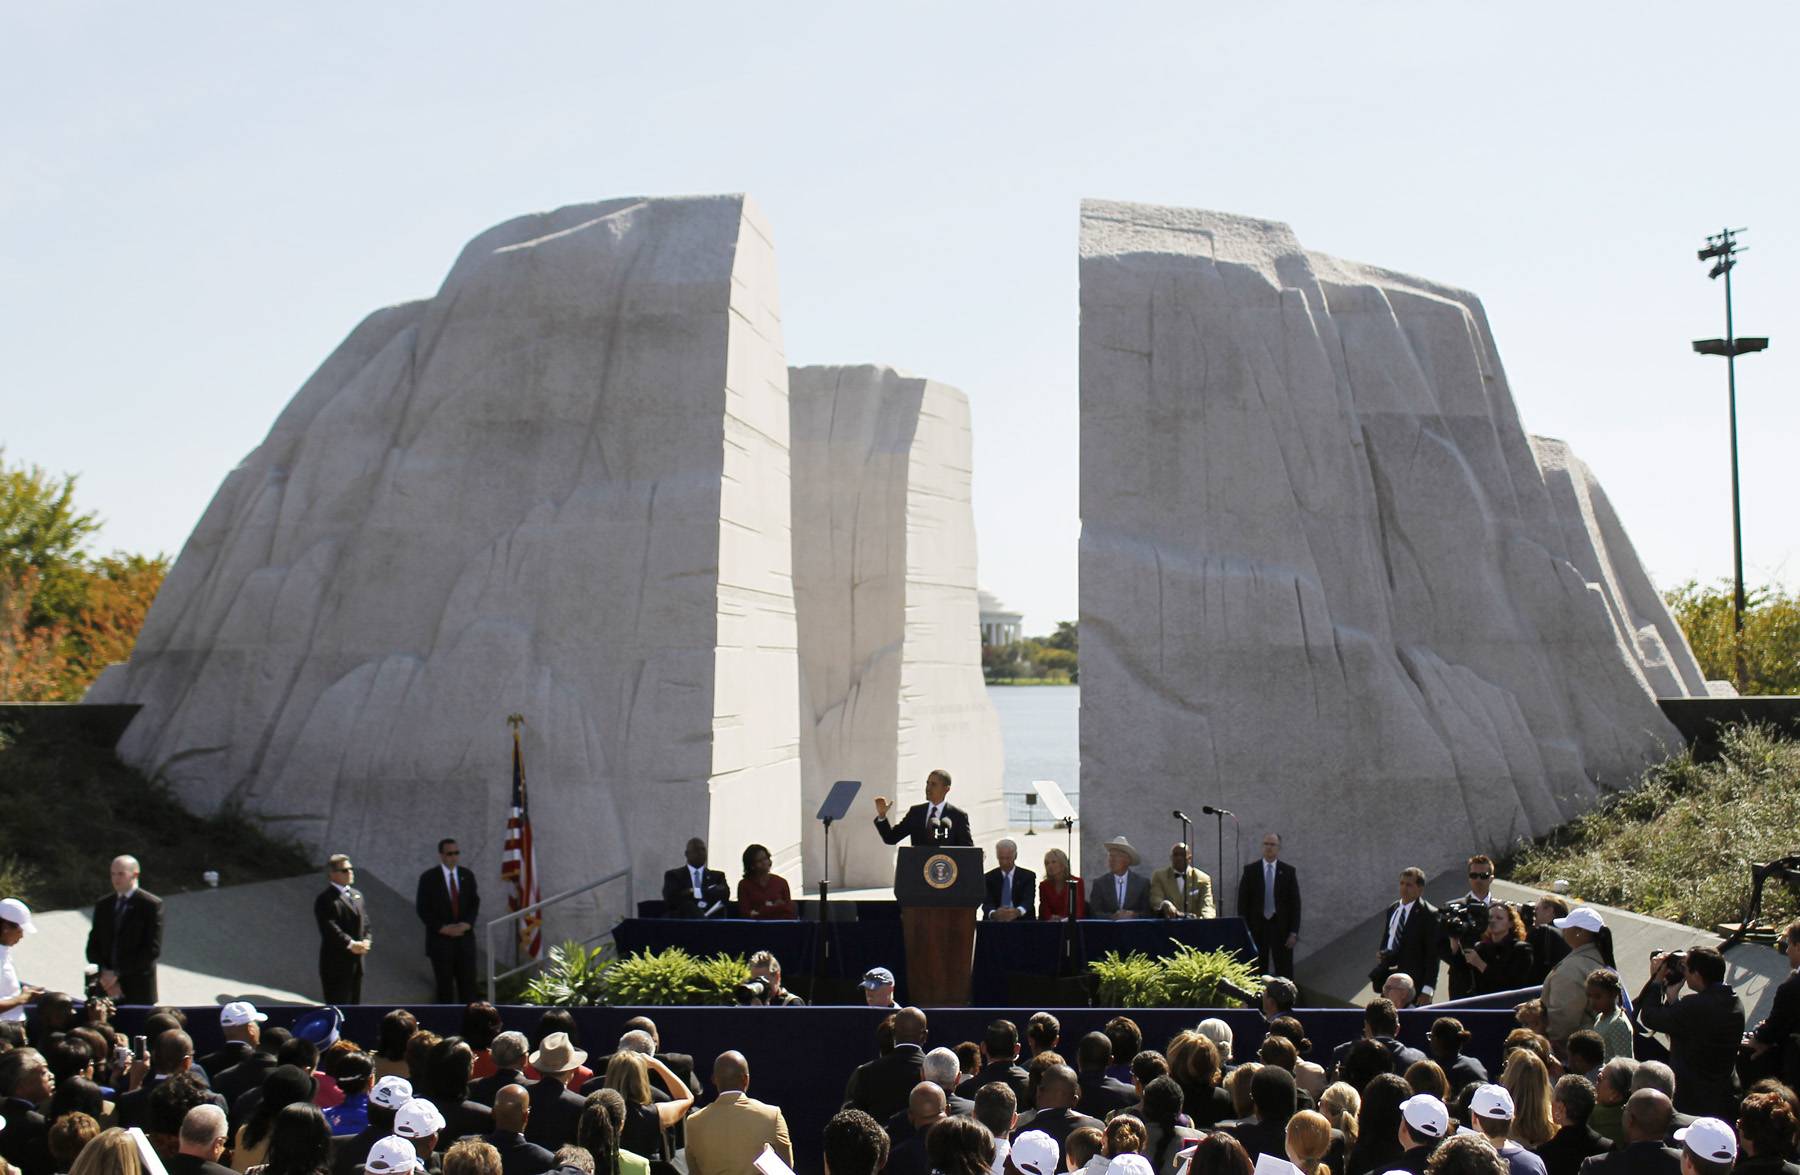 The Memorial - President Barack Obama speaks at a dedication ceremony of the Martin Luther King, Jr. National Memorial in Washington October 16, 2011. (Photo: REUTERS/Molly Riley)